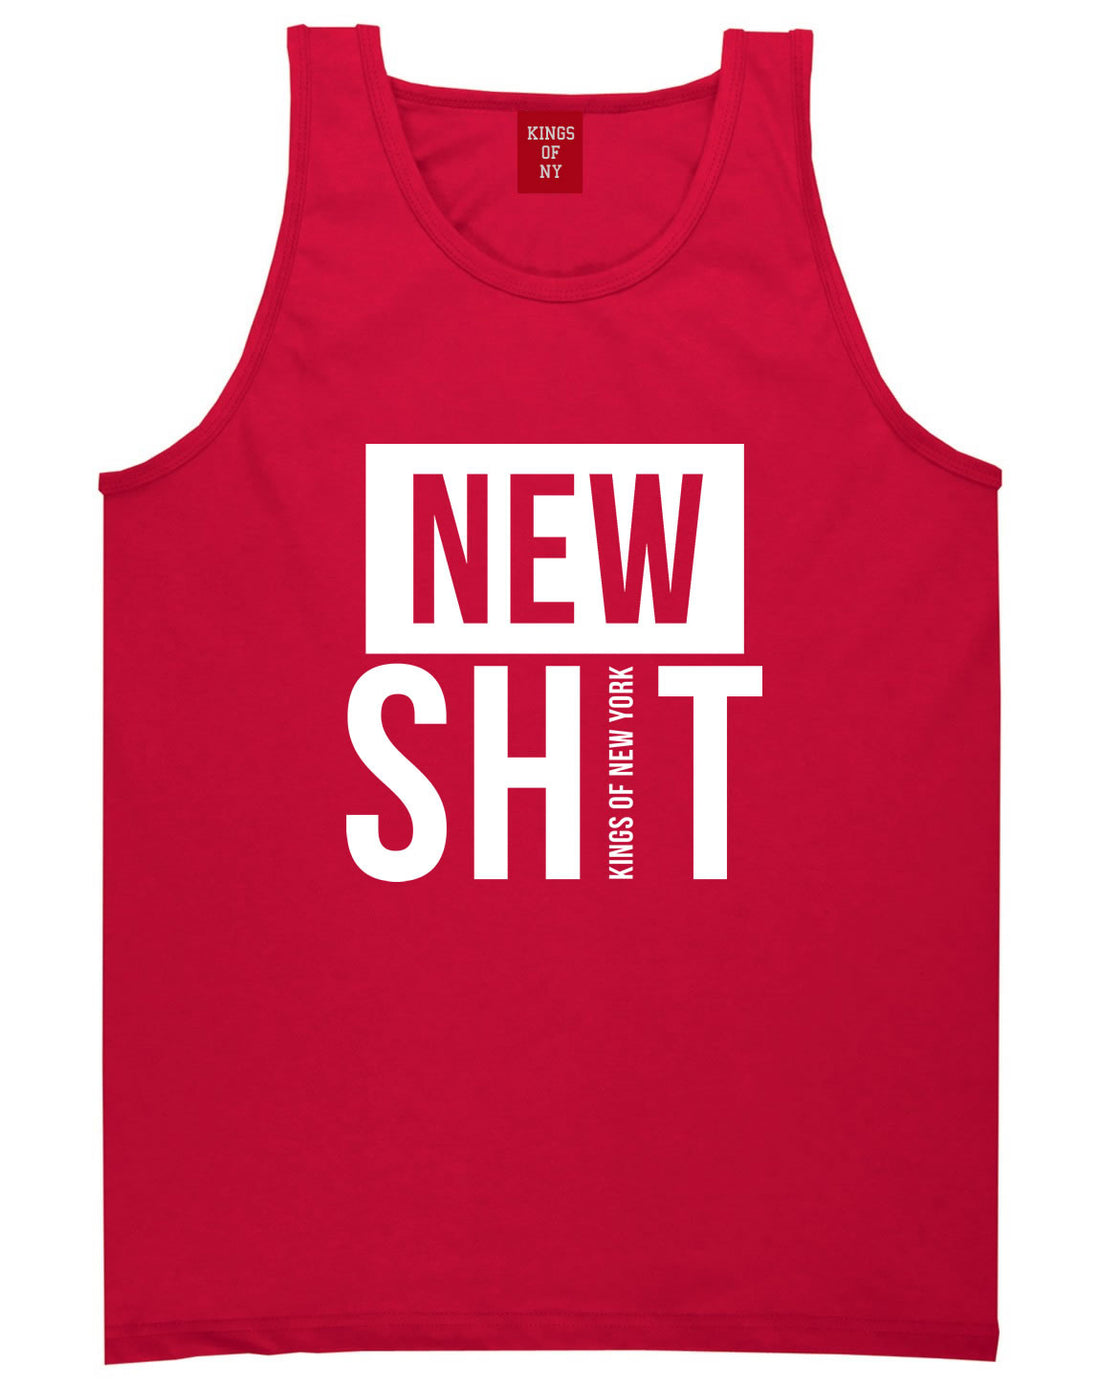 New Shit Tank Top in Red by Kings Of NY